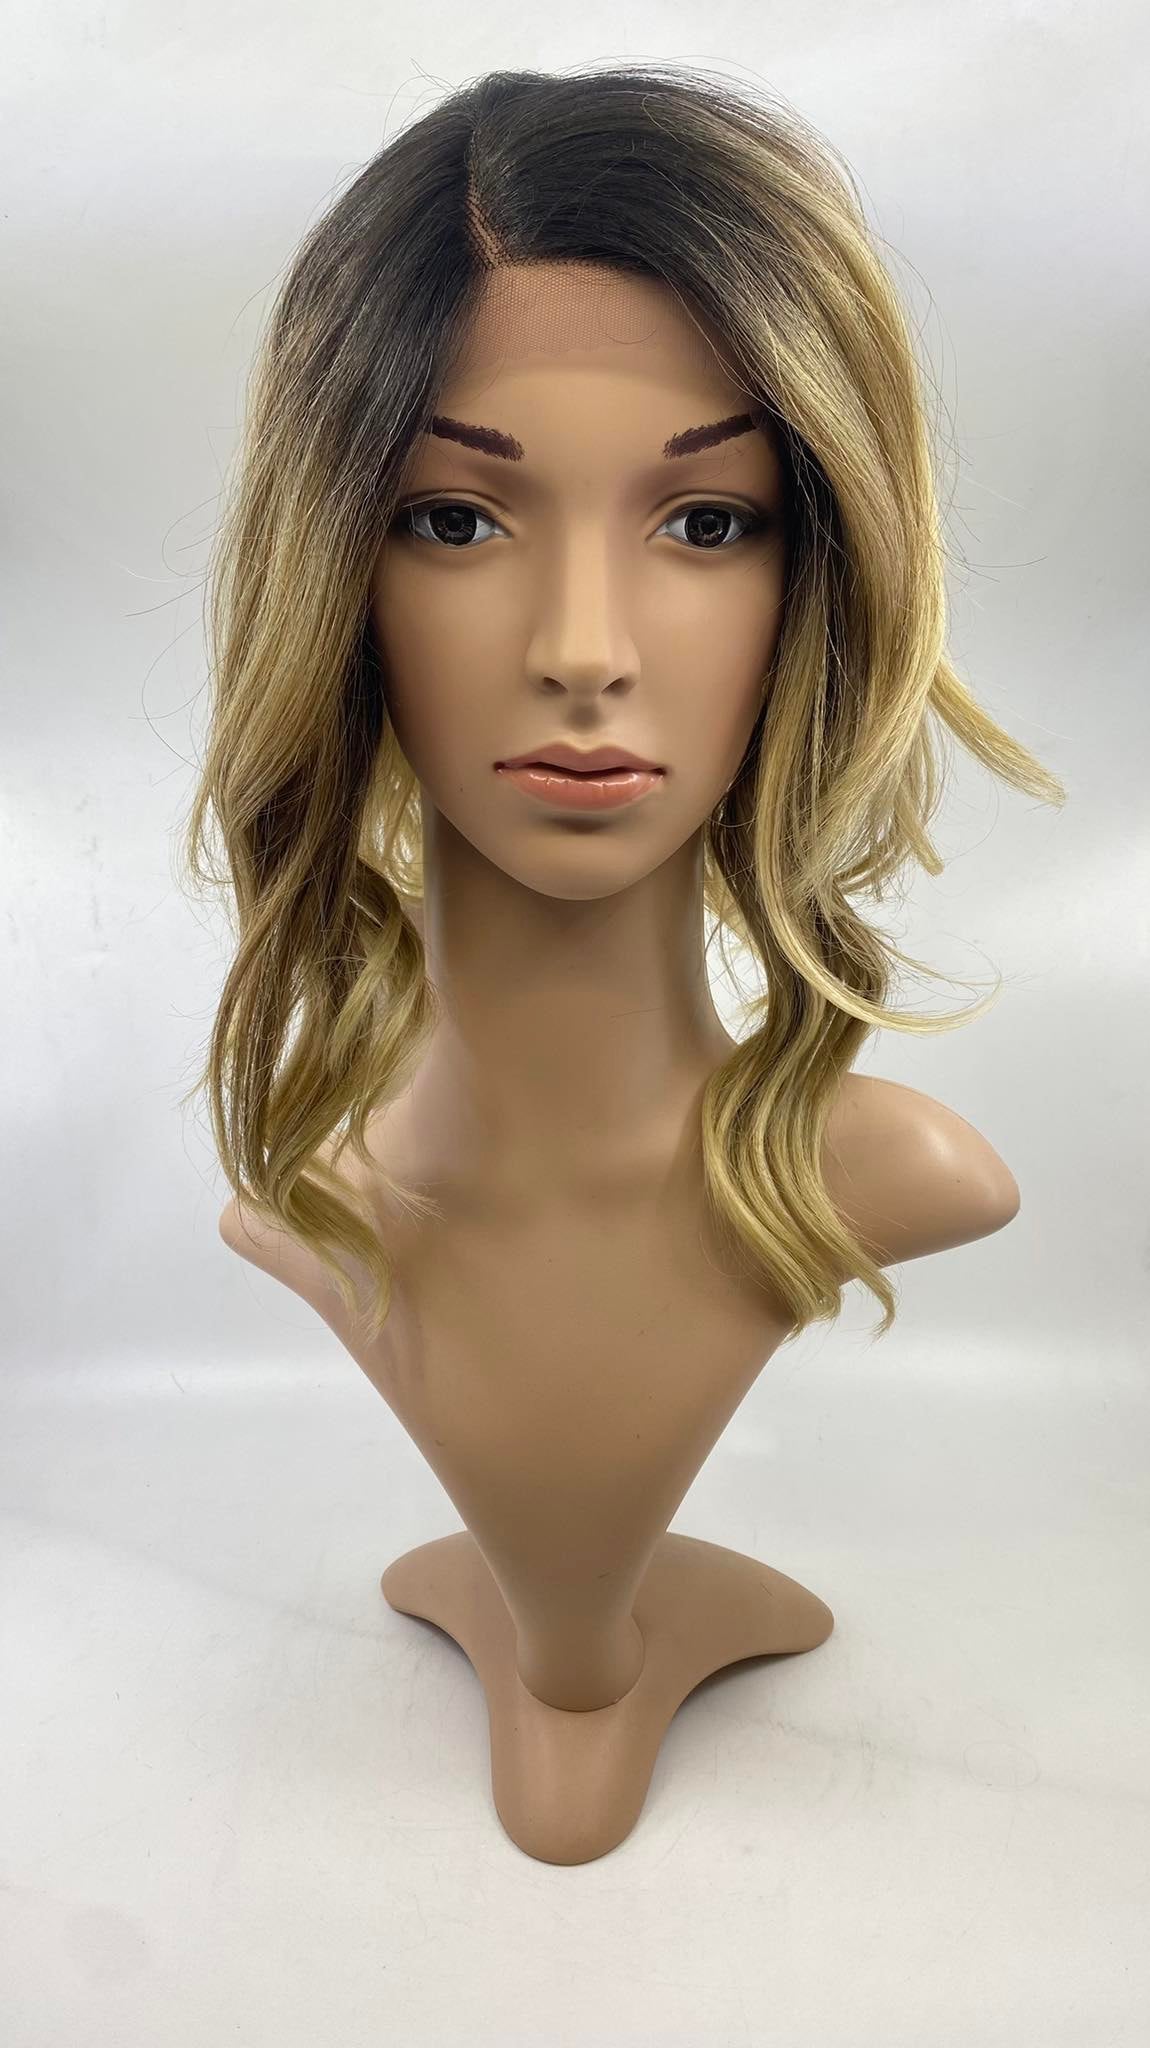 WIG- LACEFRONT- OMBRE HONEY-WAVY A-LINE INVERTED BOB